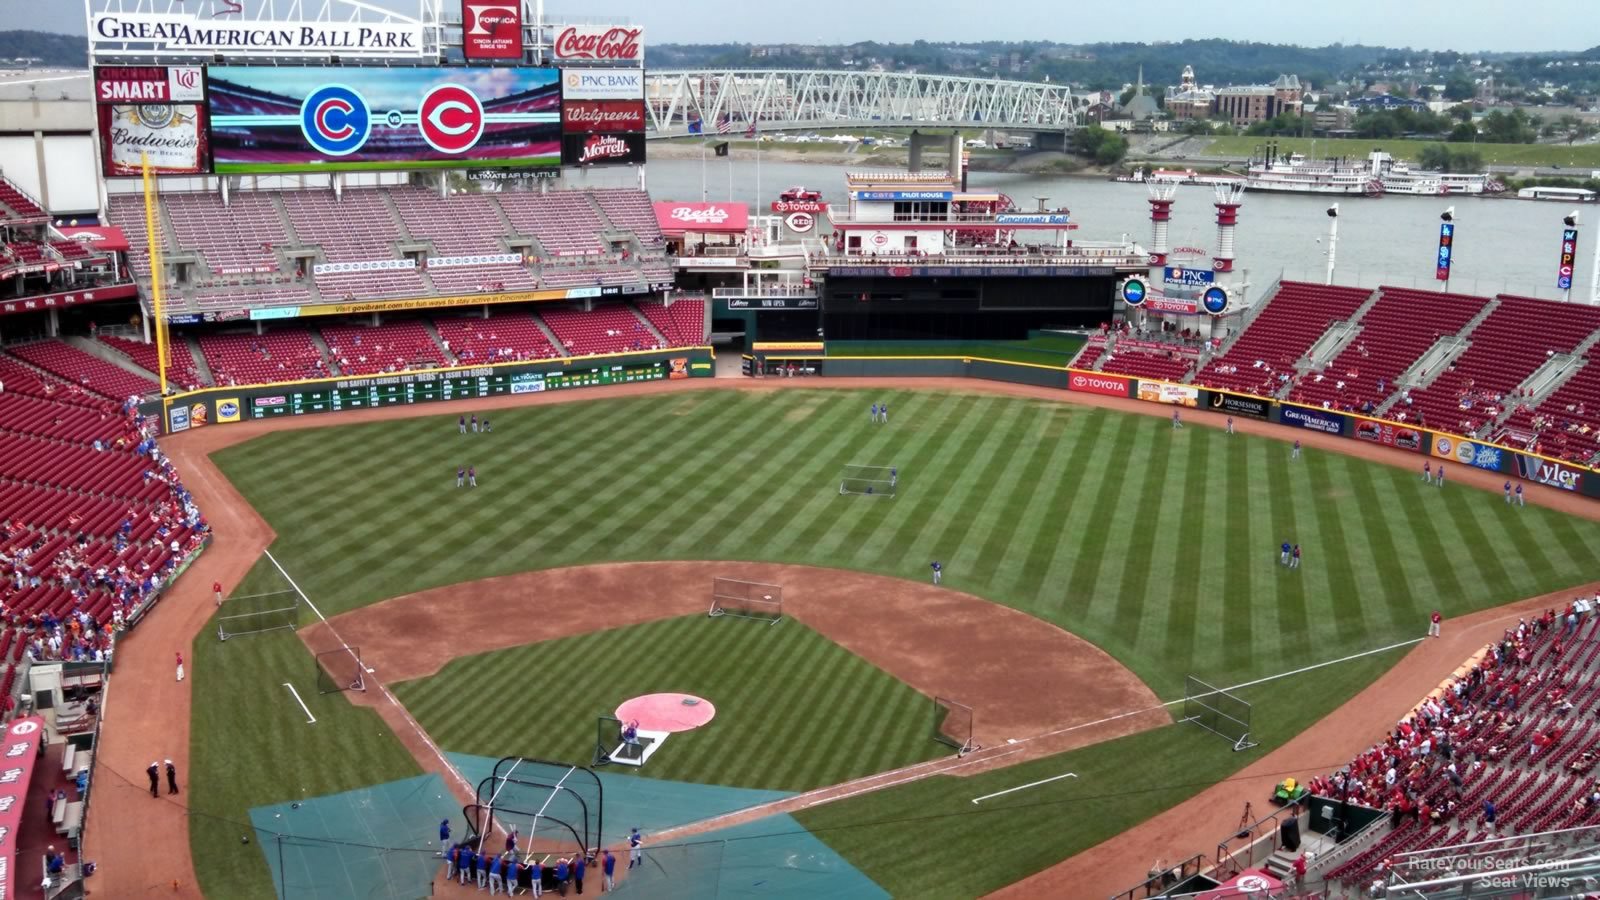 Section 124 at Great American Ball Park 